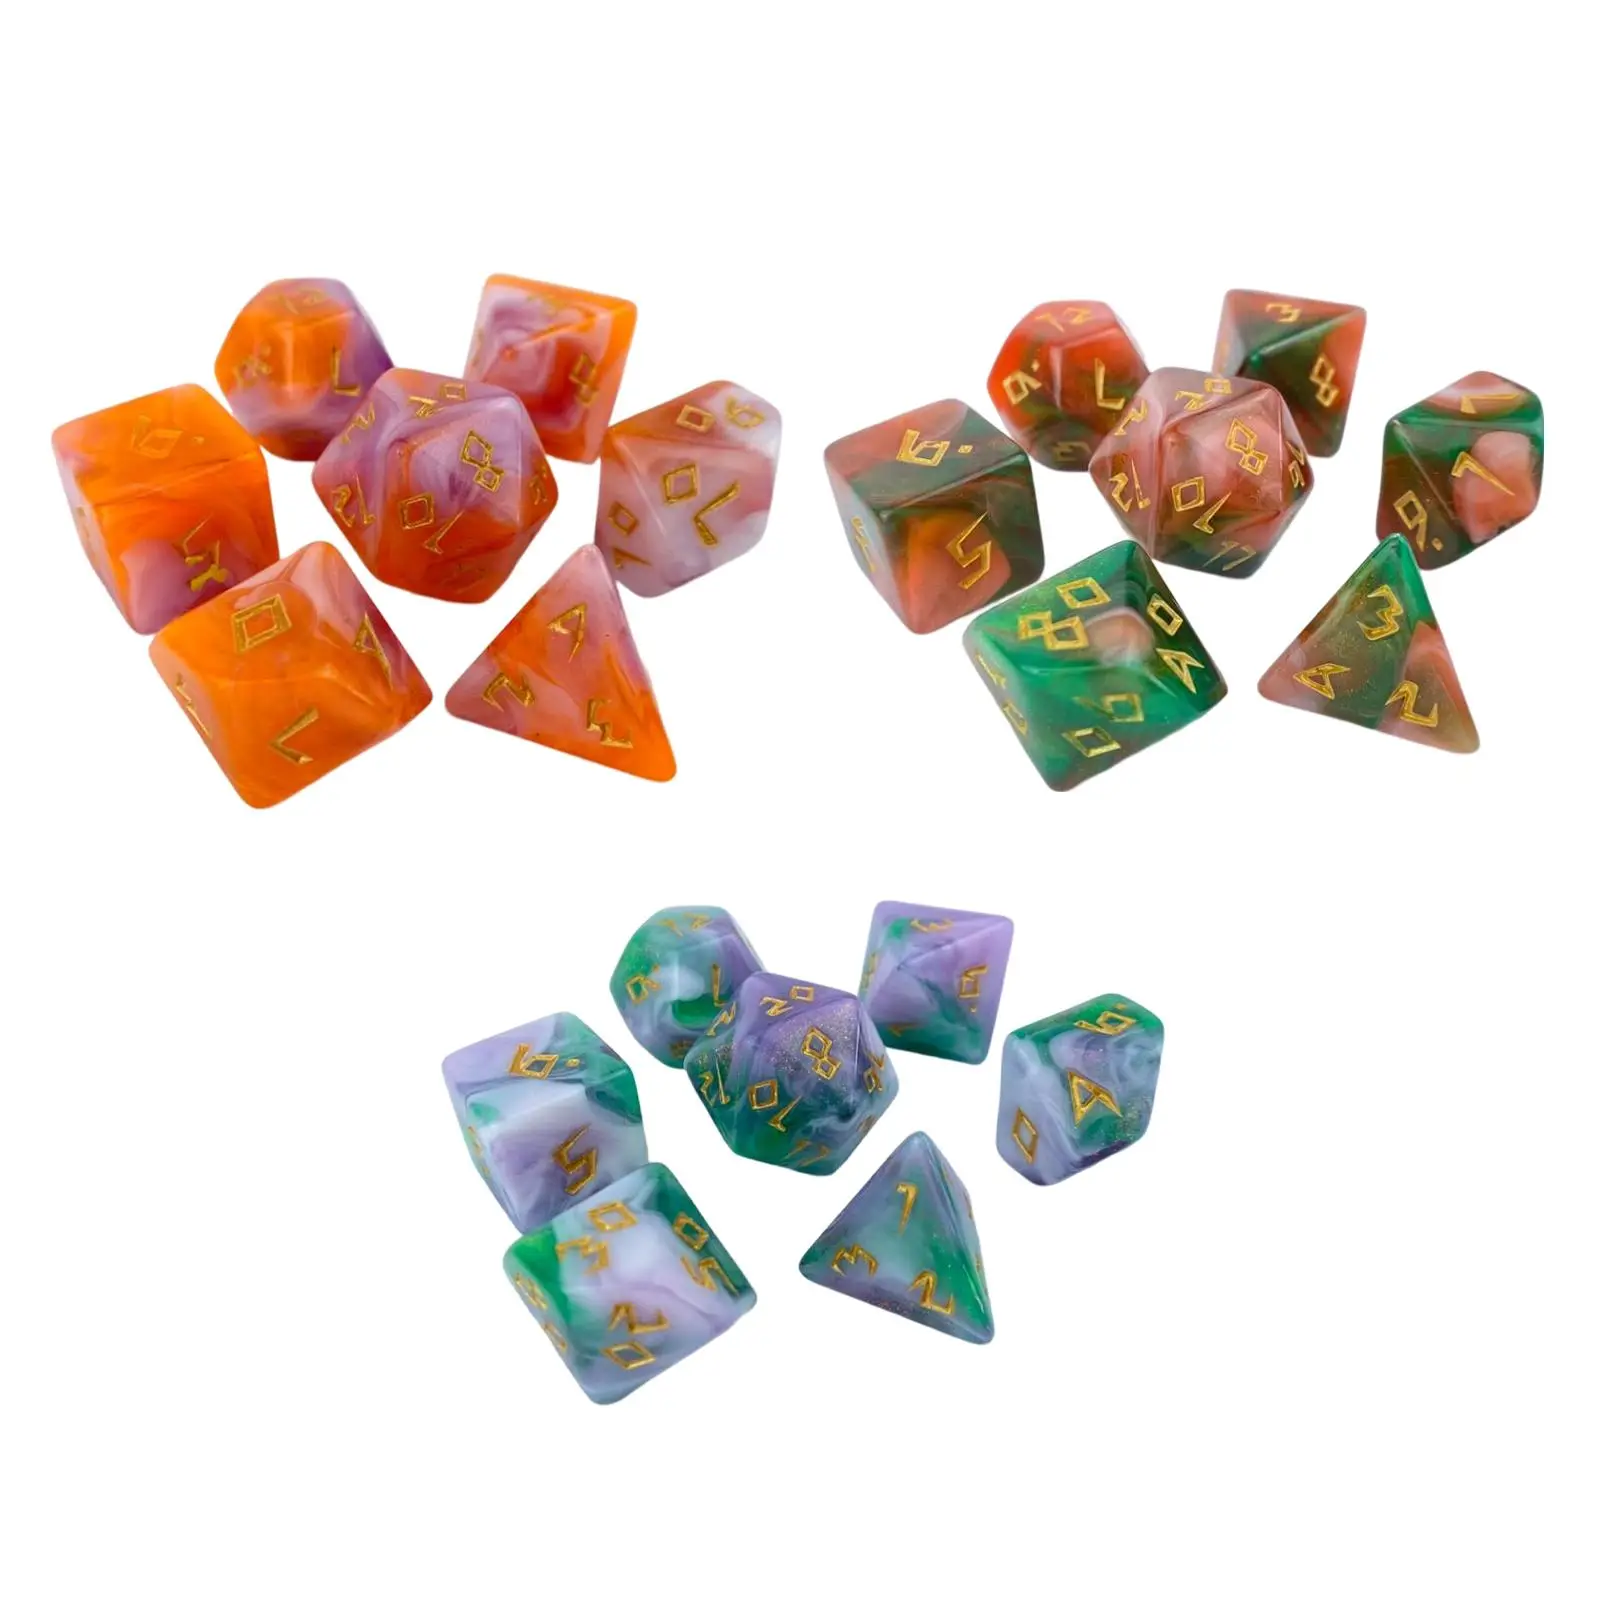 7x Gaming Dice, Multi Sided Dices, Acrylic Polyhedral Dice, for Role Playing Table Game